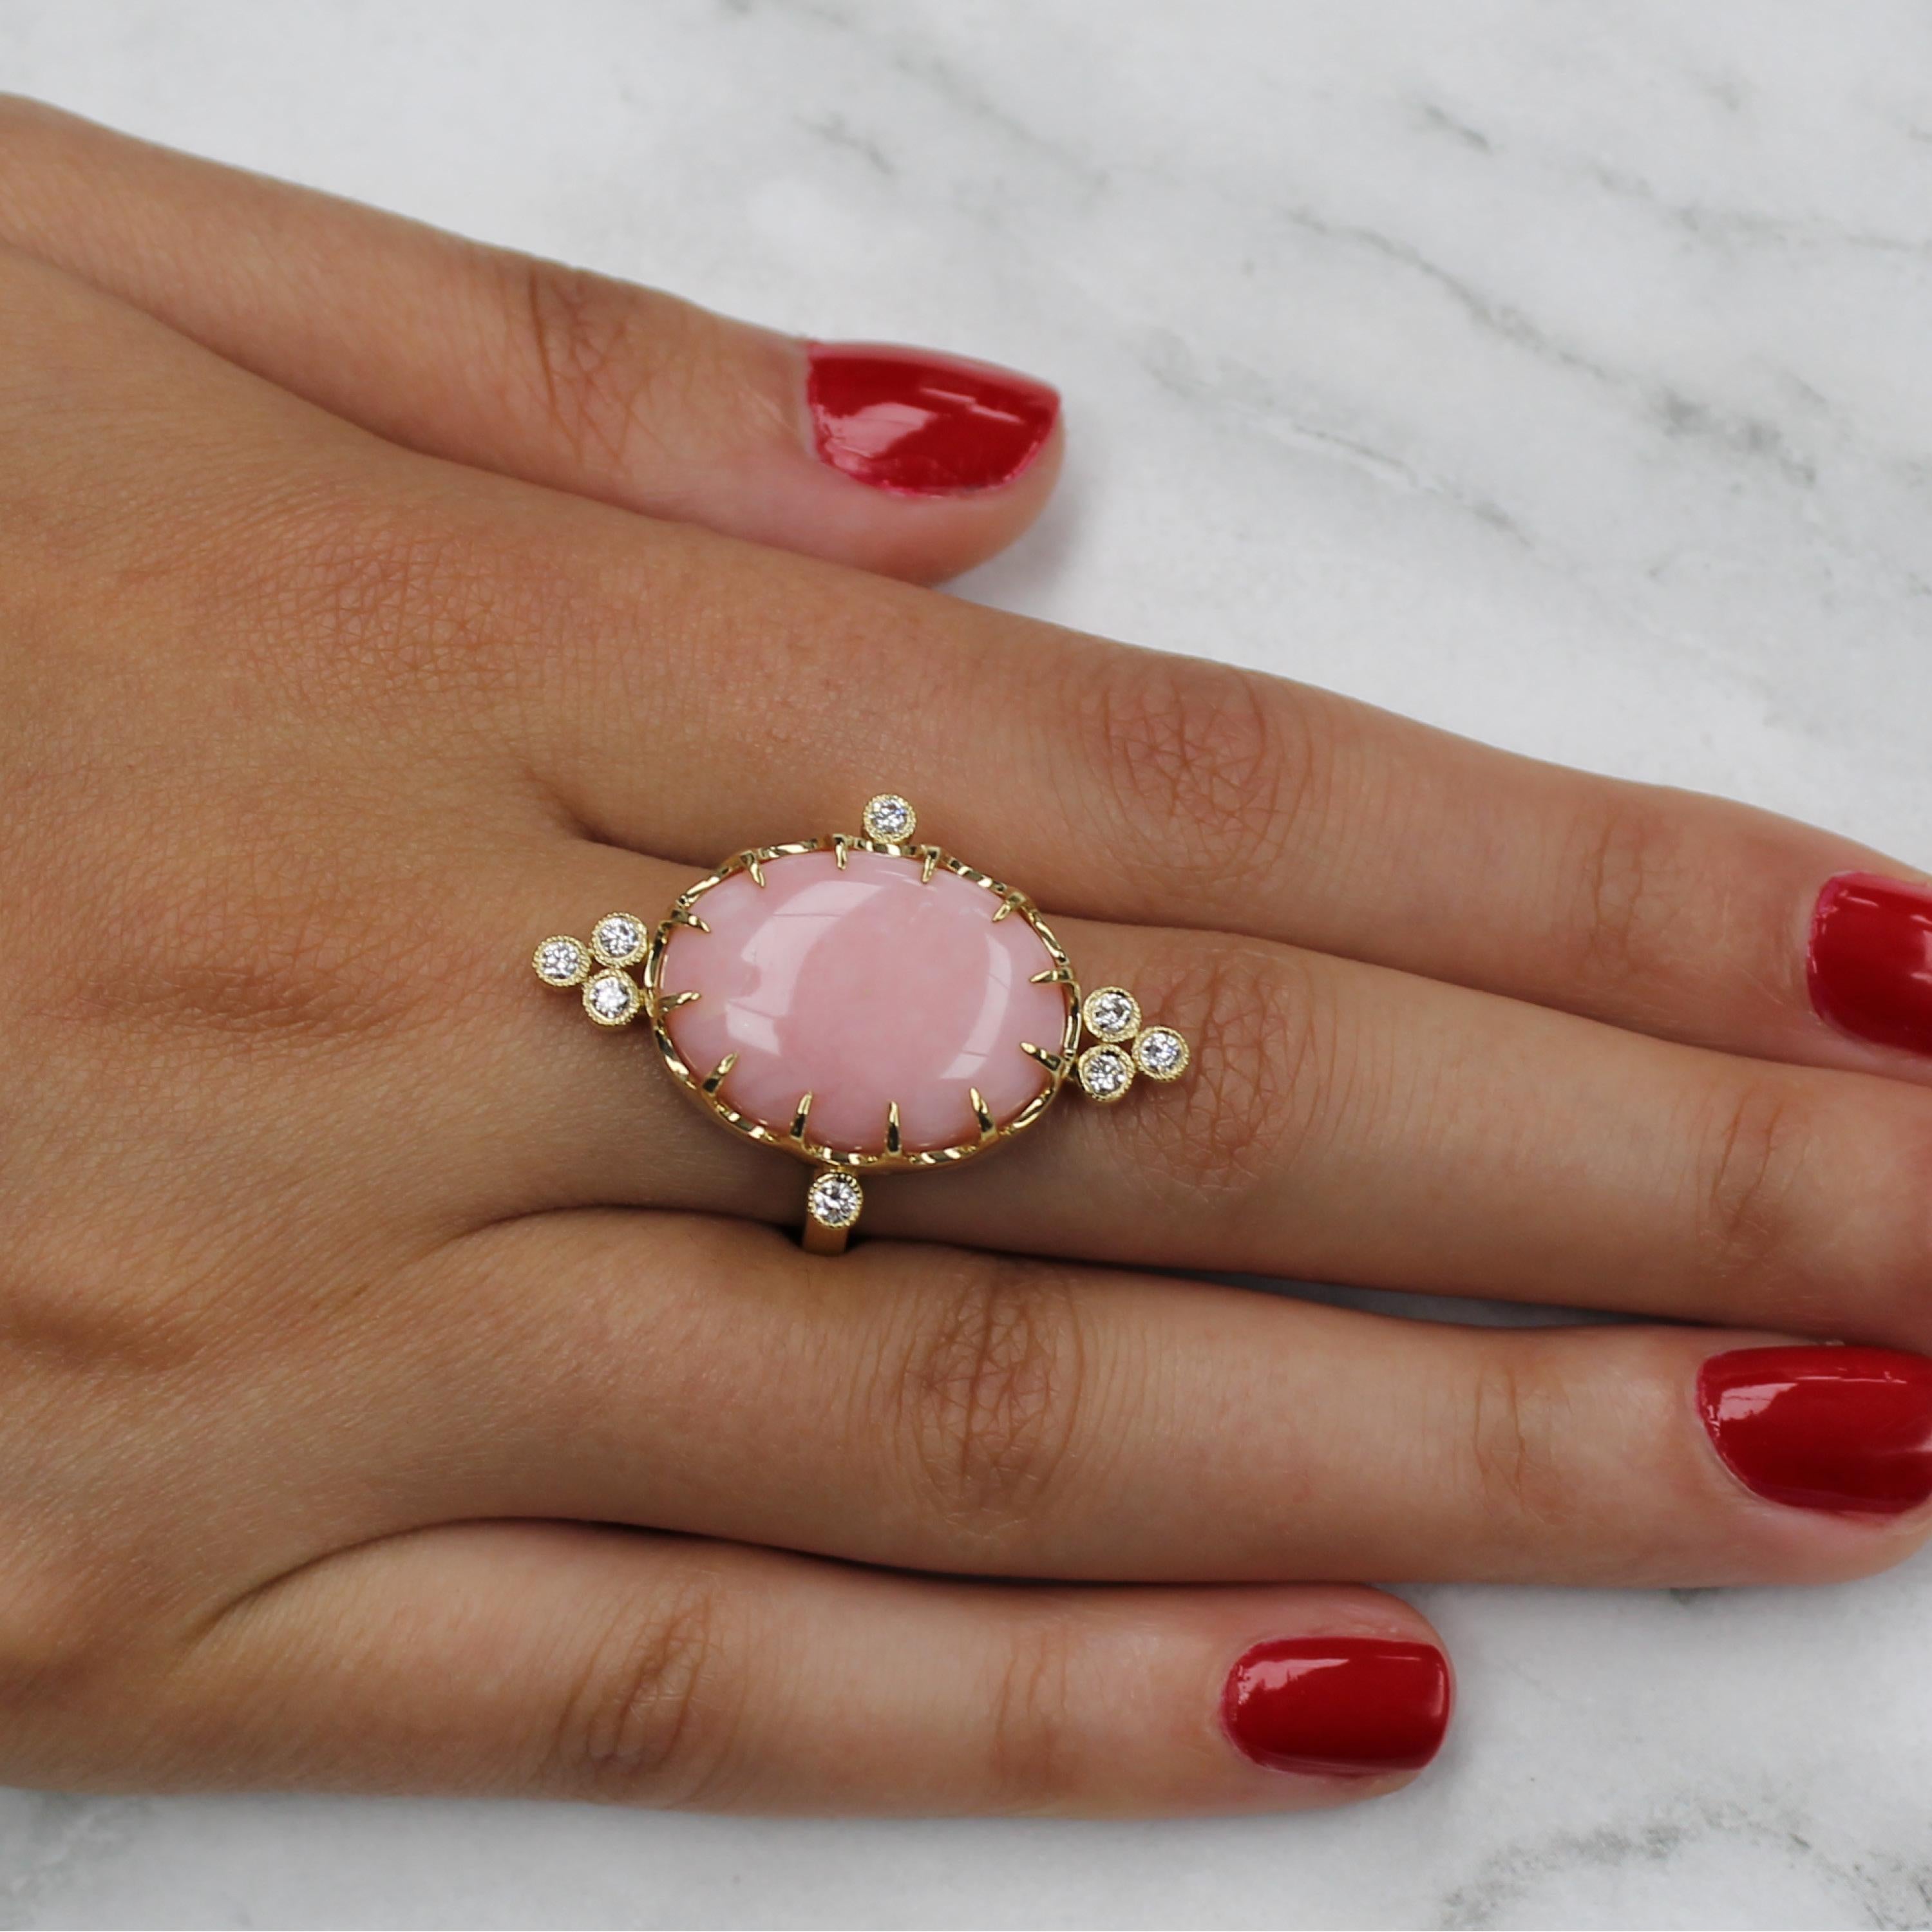 Cabochon-cut Pink Opal ring, with bezel-set diamonds, set in 18K yellow gold. Finger size 6.5, adjustable upon request/quote. Pink Opal is a powerful stone, known for healing the emotions, especially those connected with subconsciously held pain,